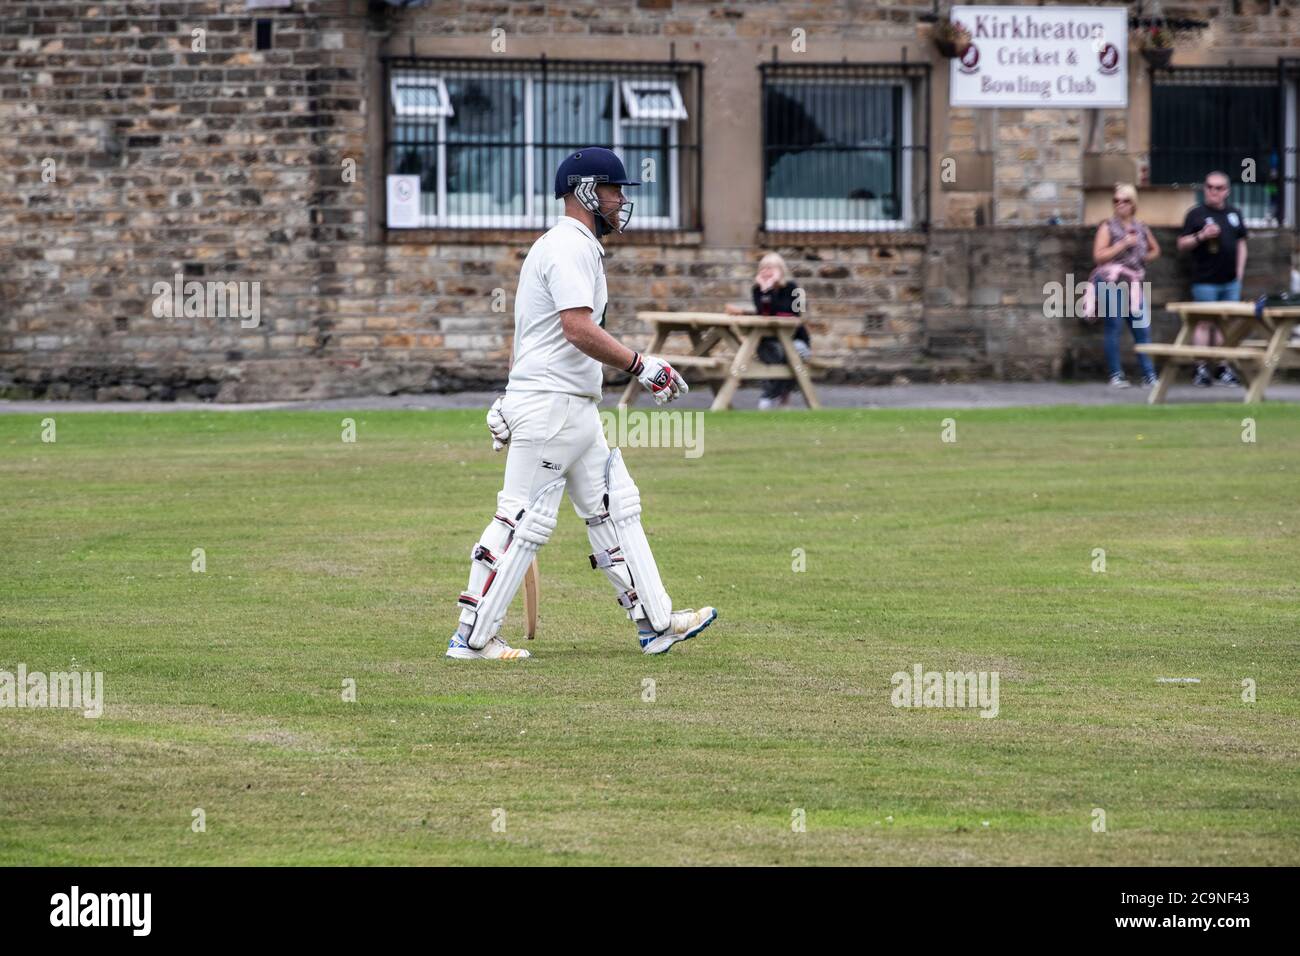 New Batsman in a village cricket match in West Yorkshire taking the field in pads, gloves and helmet with a cricket bat on a Saturday afternoon Stock Photo